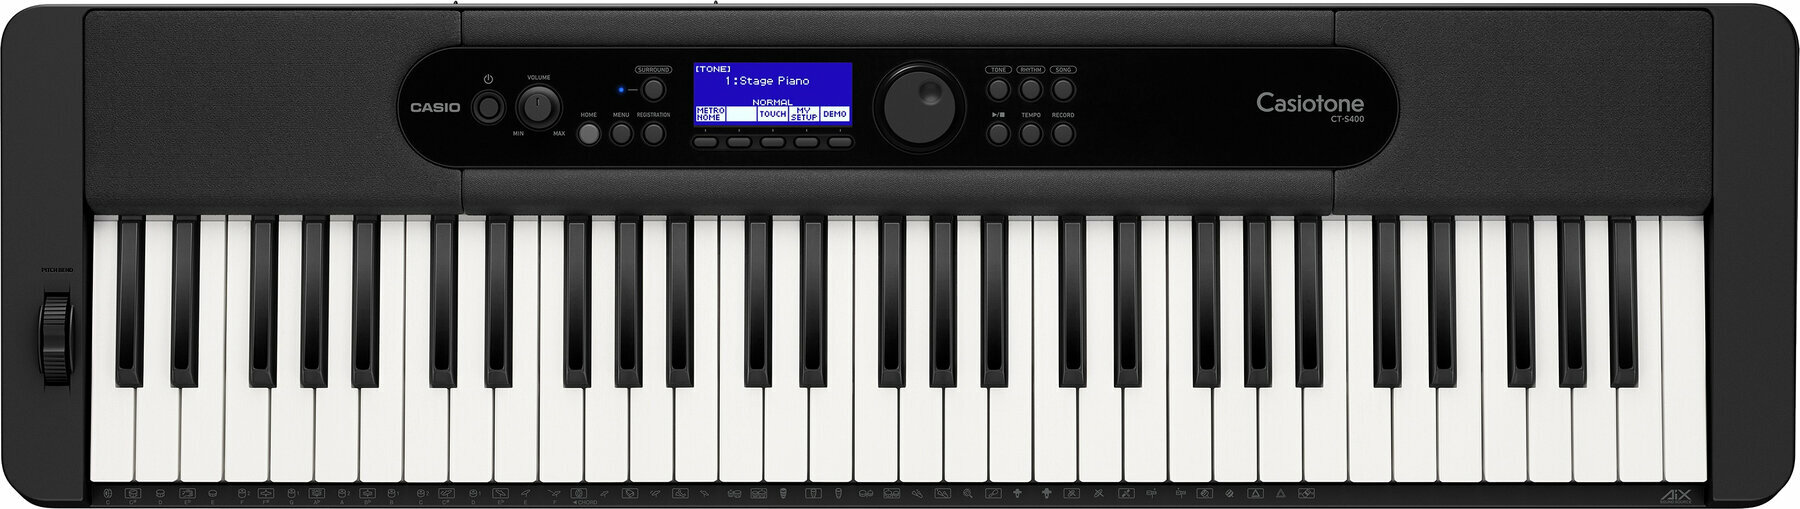 Keyboard with Touch Response Casio CT-S400 (Just unboxed)